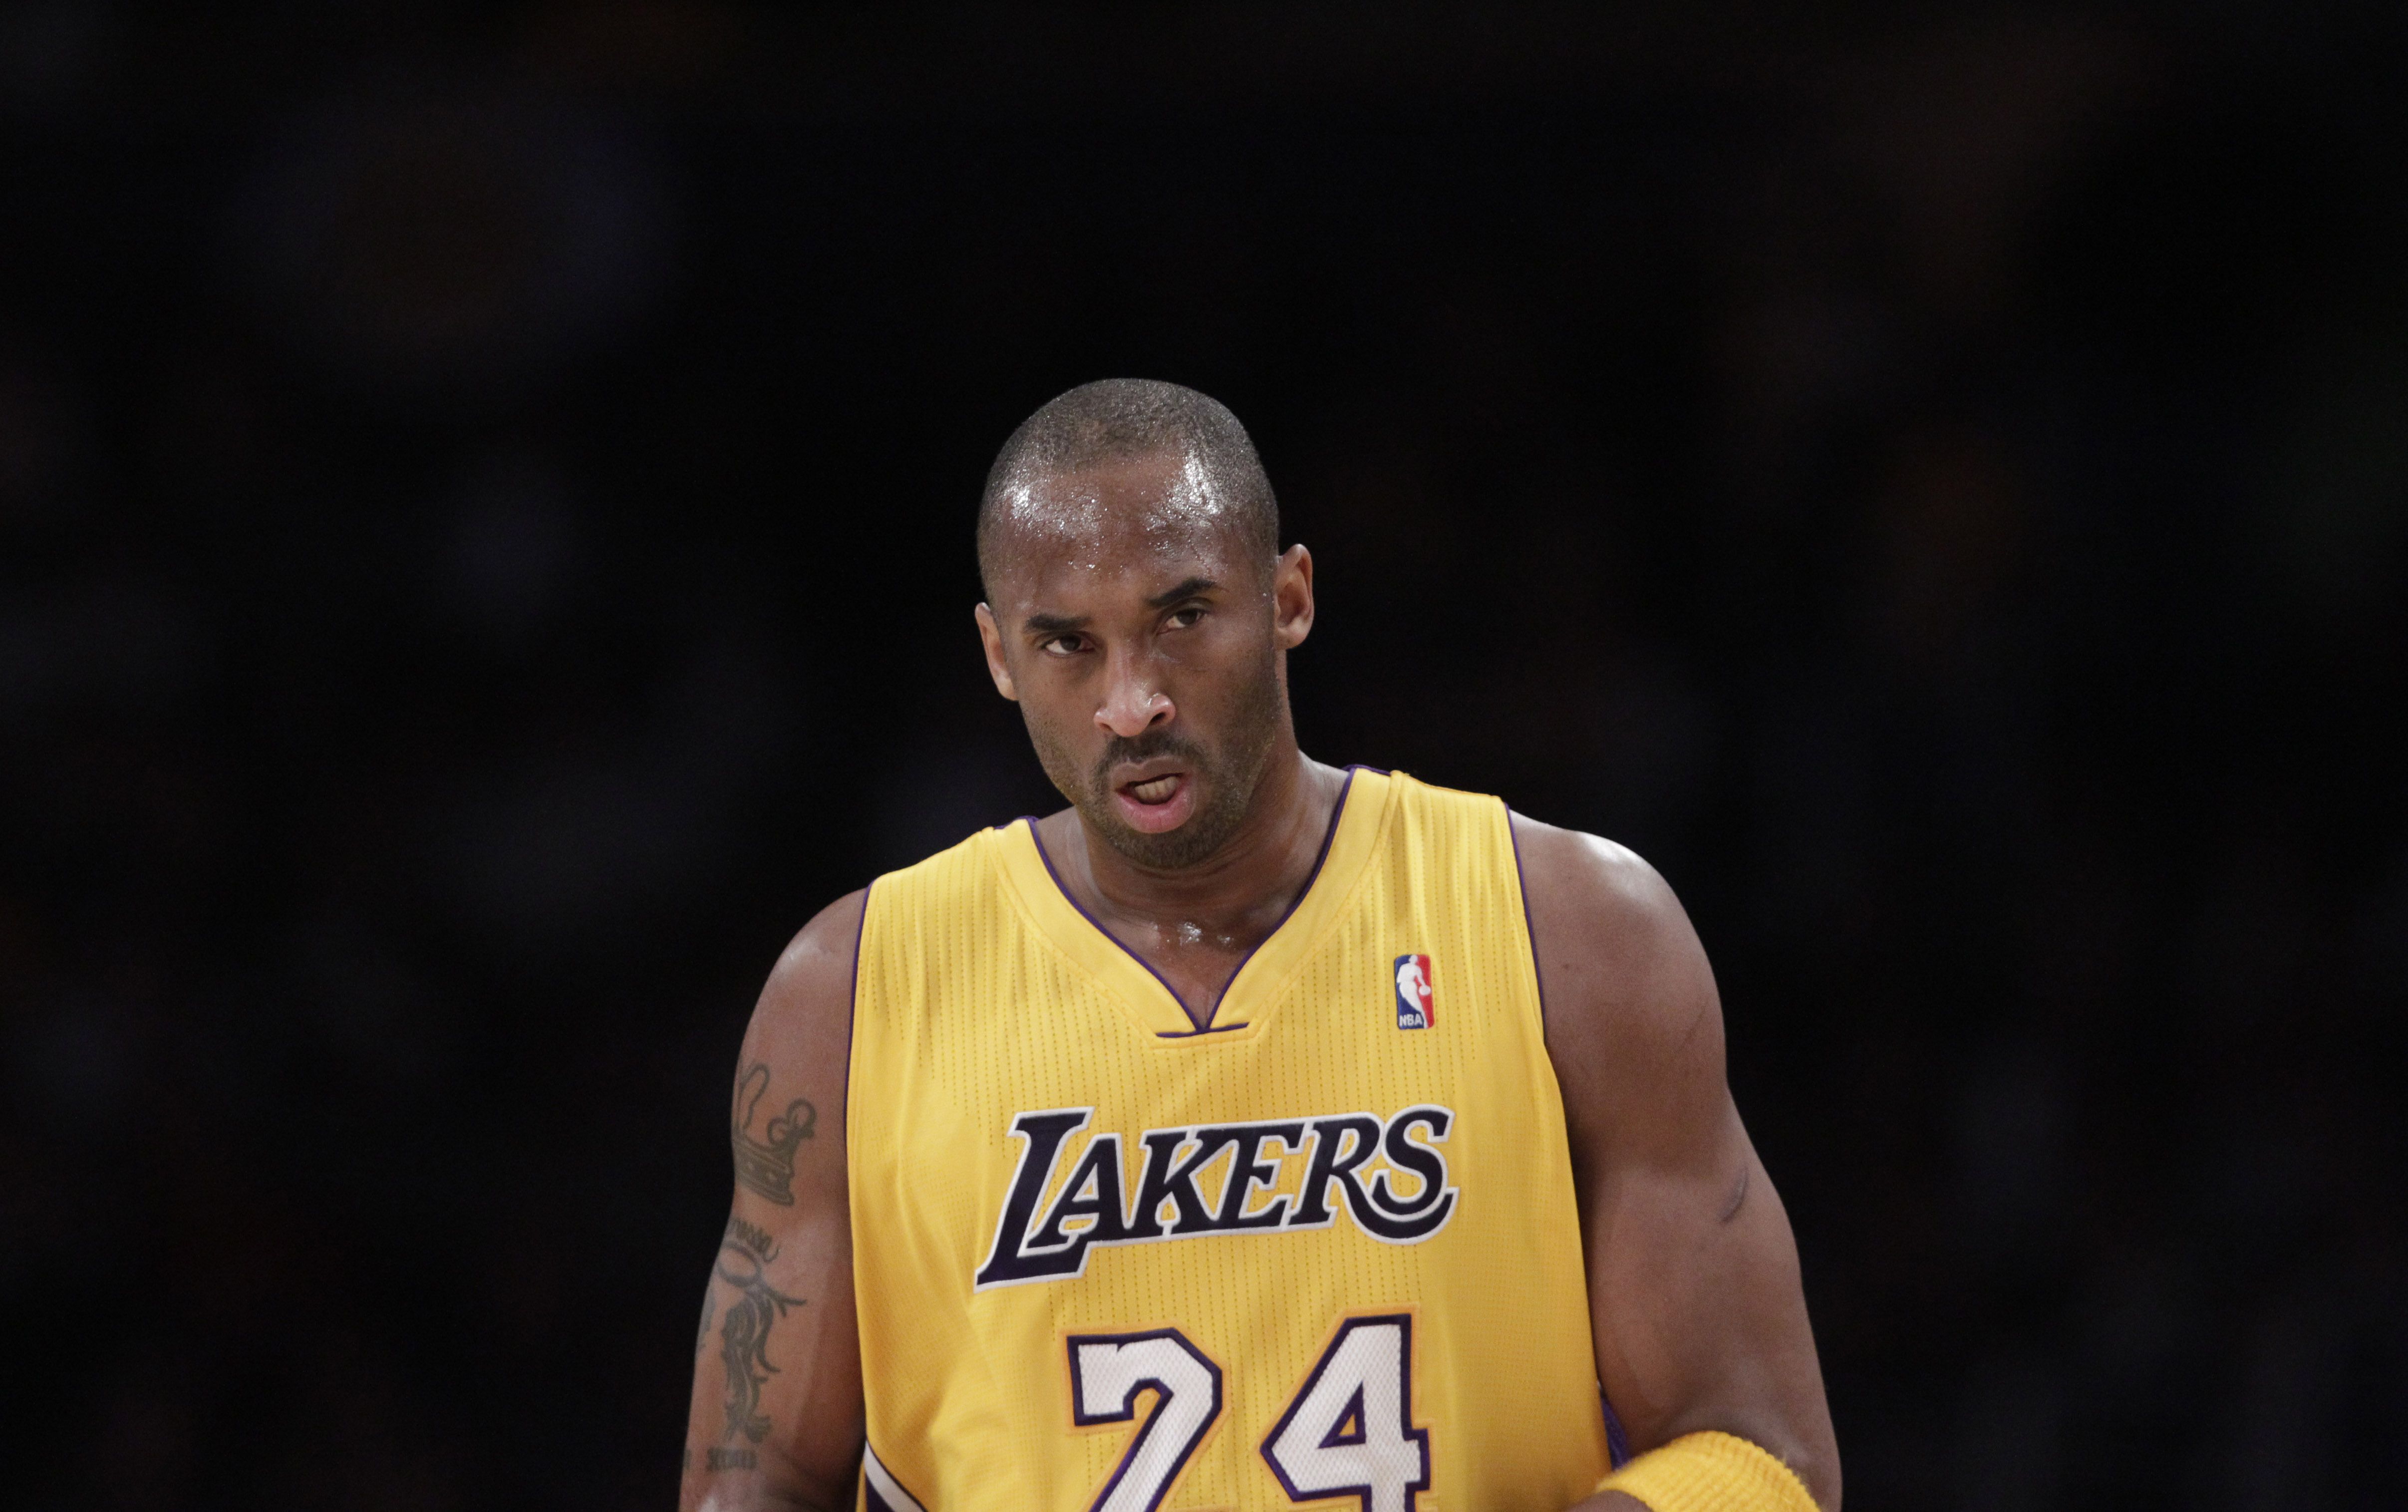 Why did Kobe Bryant wear two jersey numbers?